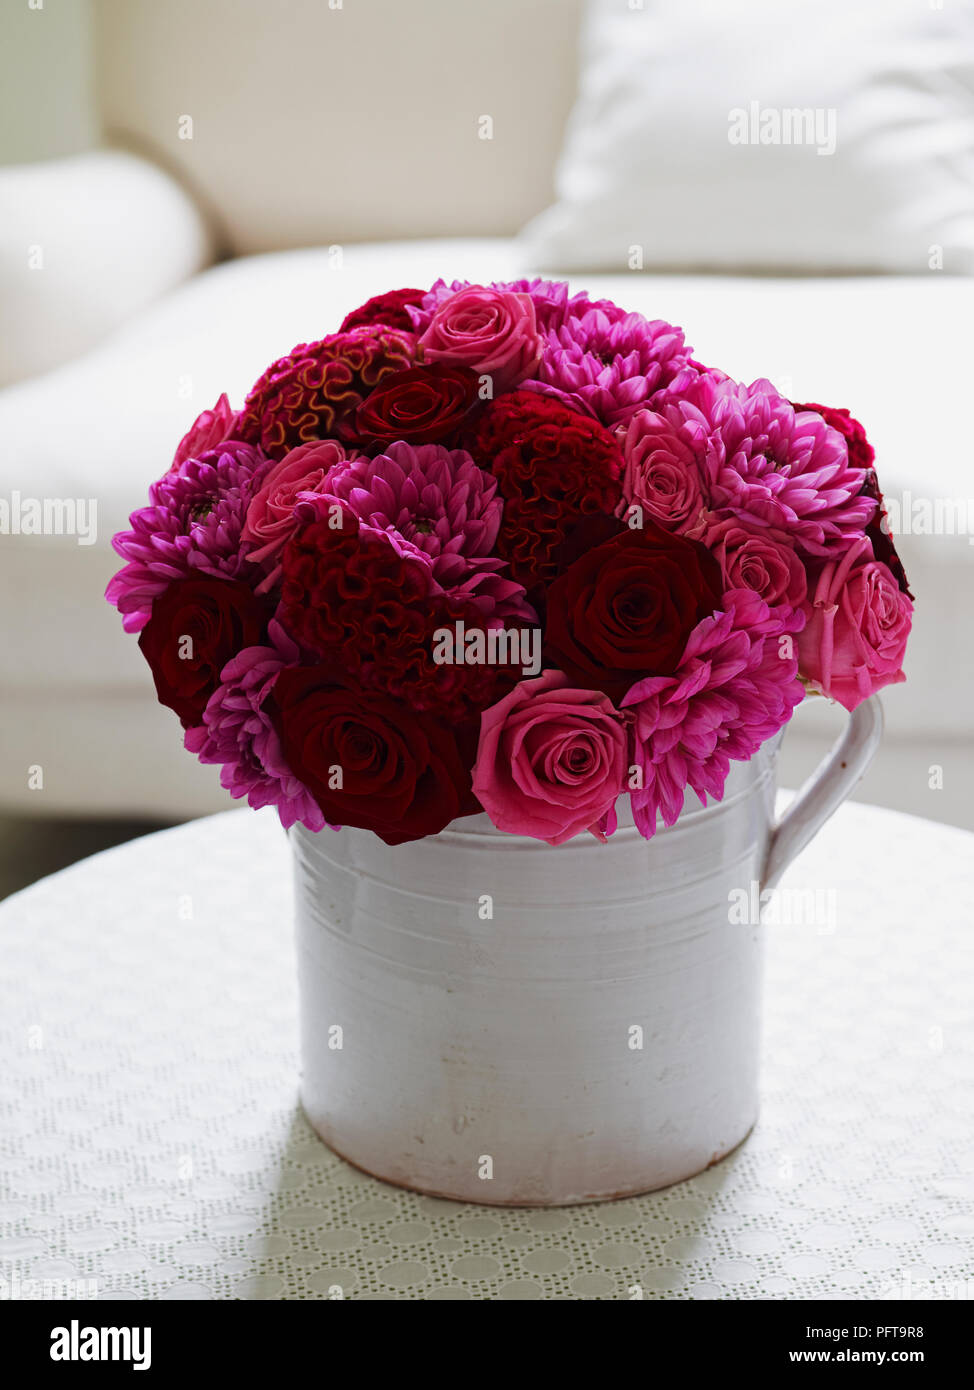 Red and pink hand tie bouquet consisting of red and pink celosia, pink  acqua rose, red 'Grand Prix' rose and pink dahlia Stock Photo - Alamy